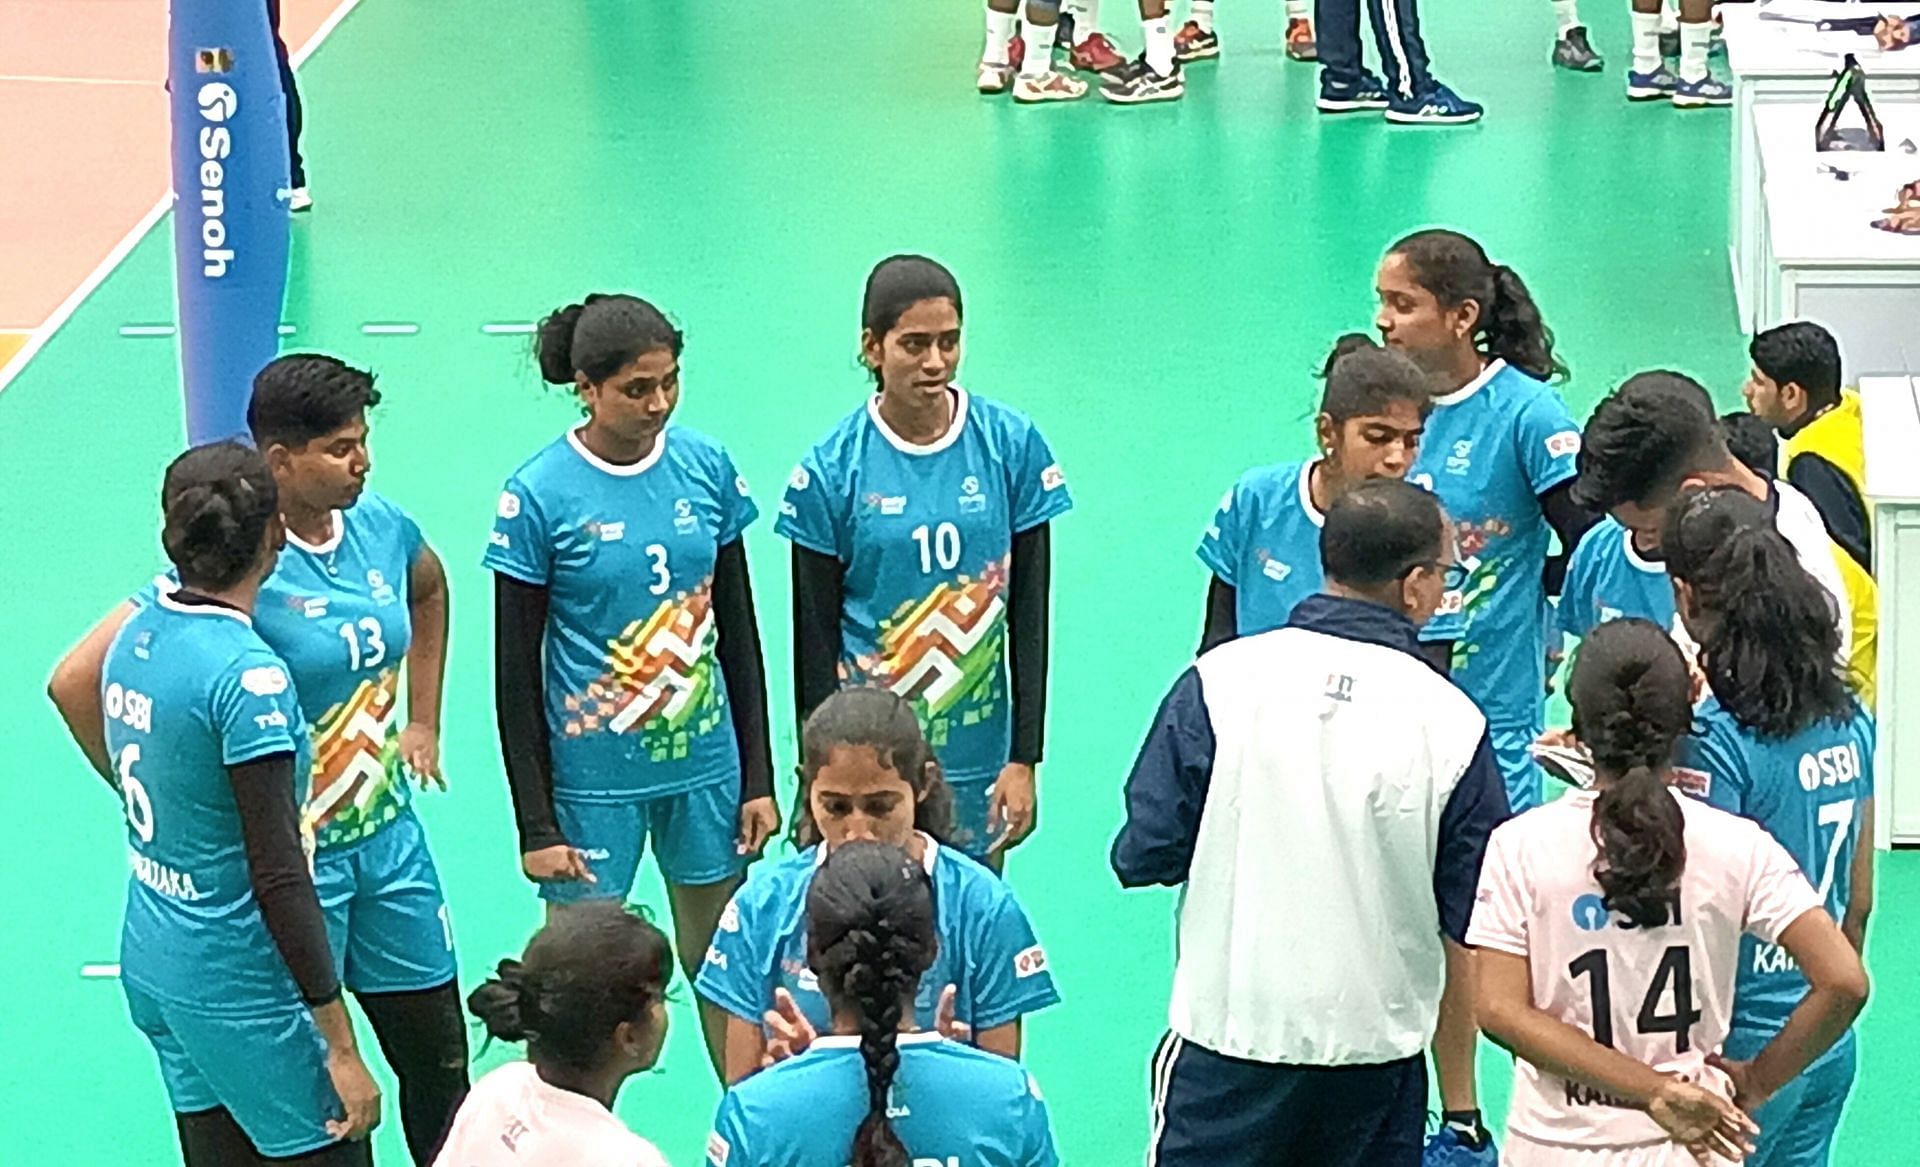 The Karnataka volleyball team during their preliminary league match against West Bengal at the Khelo India Youth Games in Bhopal on Monday. Photo credit: Navneet Singh